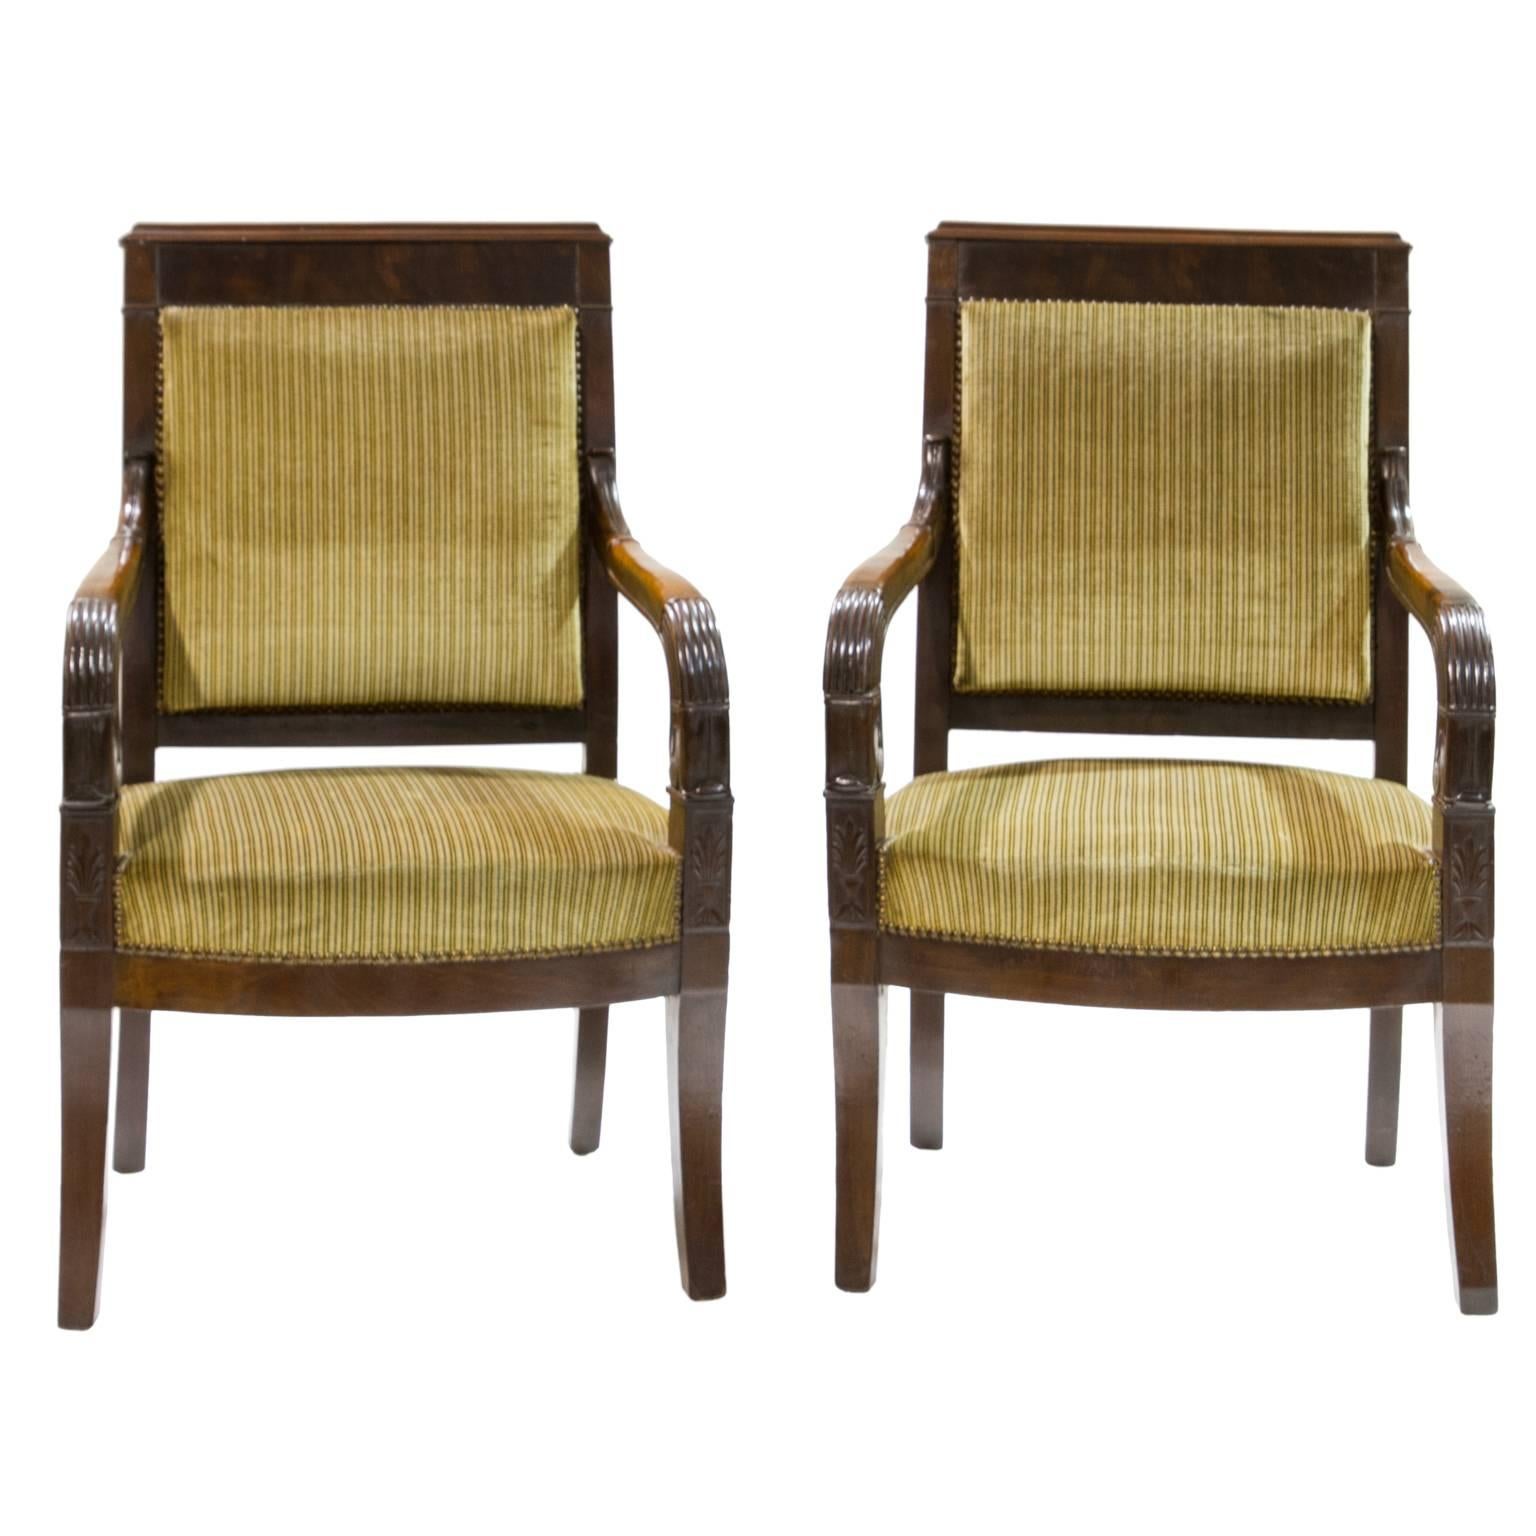 19th Century Pair of French Empire Mahogany Open Armchairs